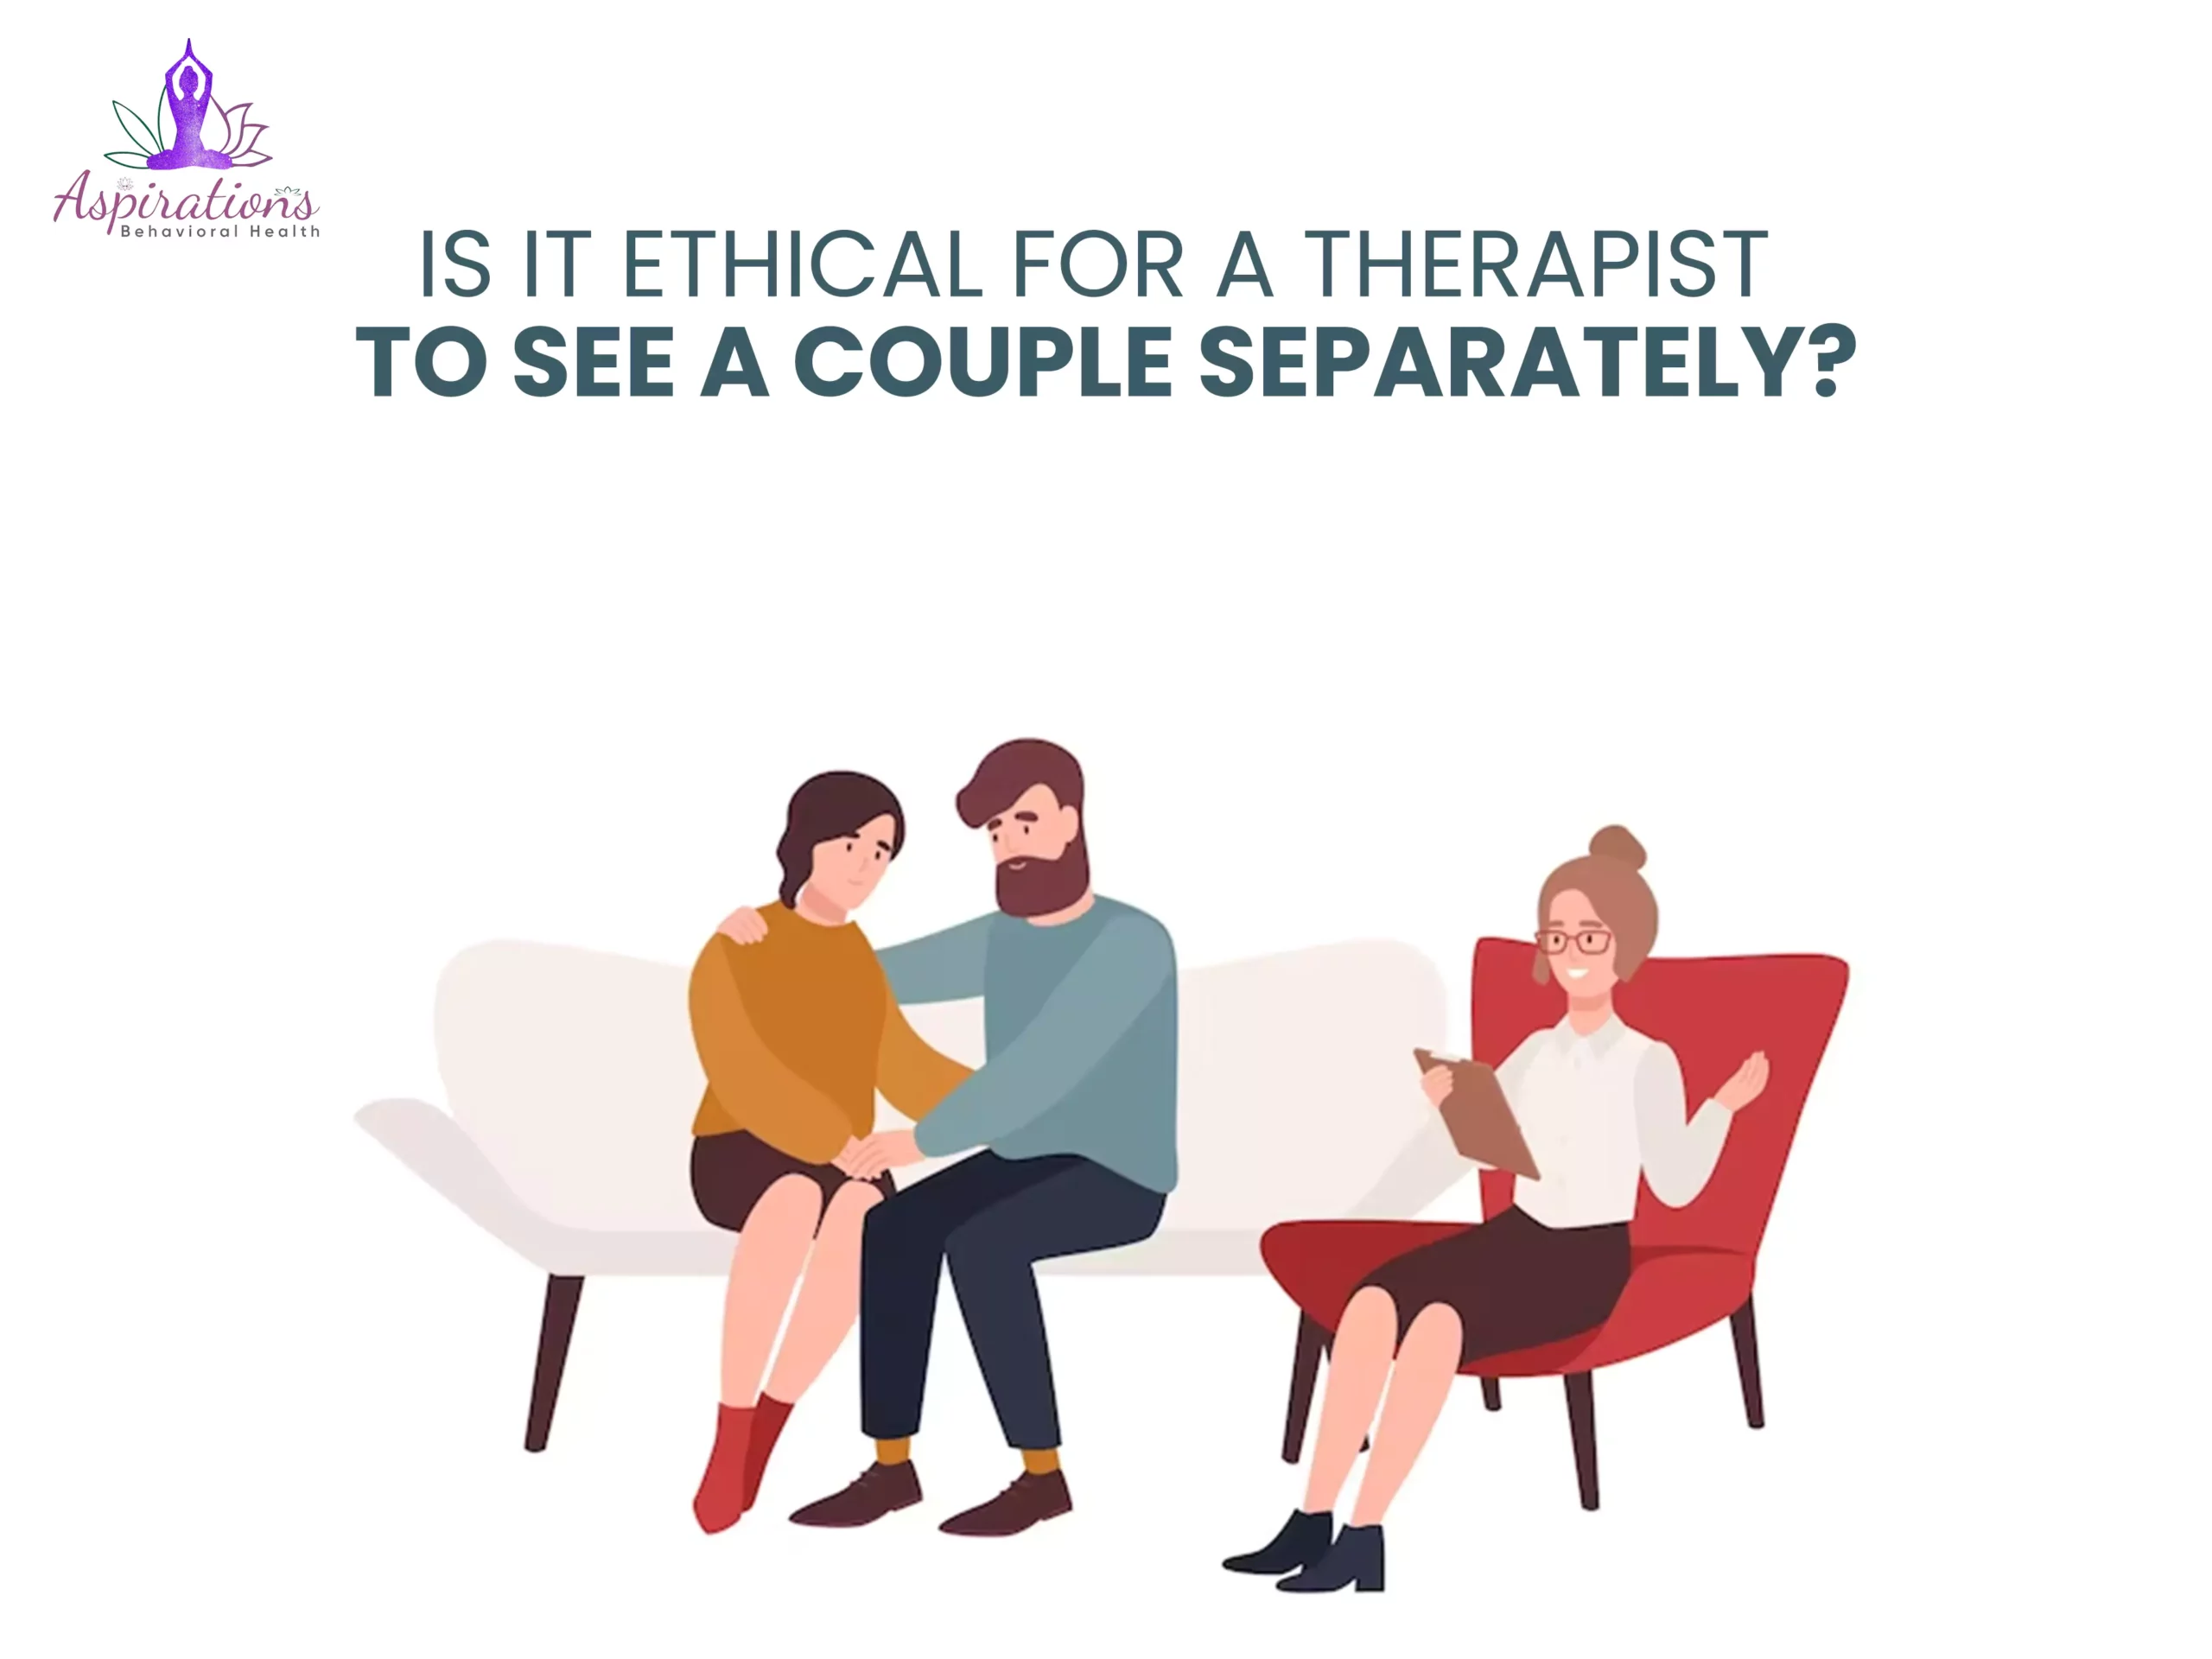 Is It Ethical For A Therapist To See A Couple Separately?